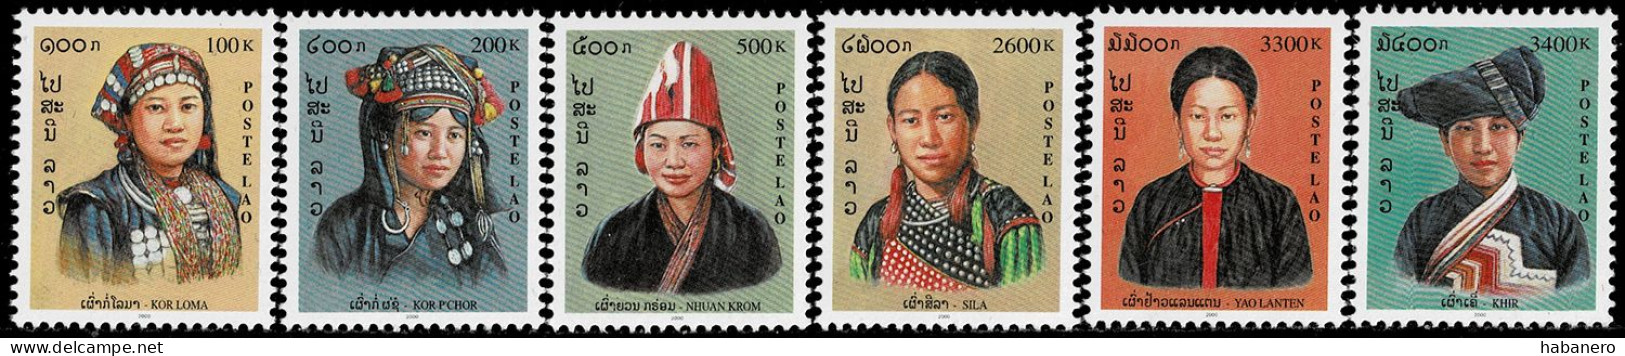 LAOS 2000 Mi 1710-1715 ETHNIC PEOPLE AND COSTUMES MINT STAMPS ** - Laos